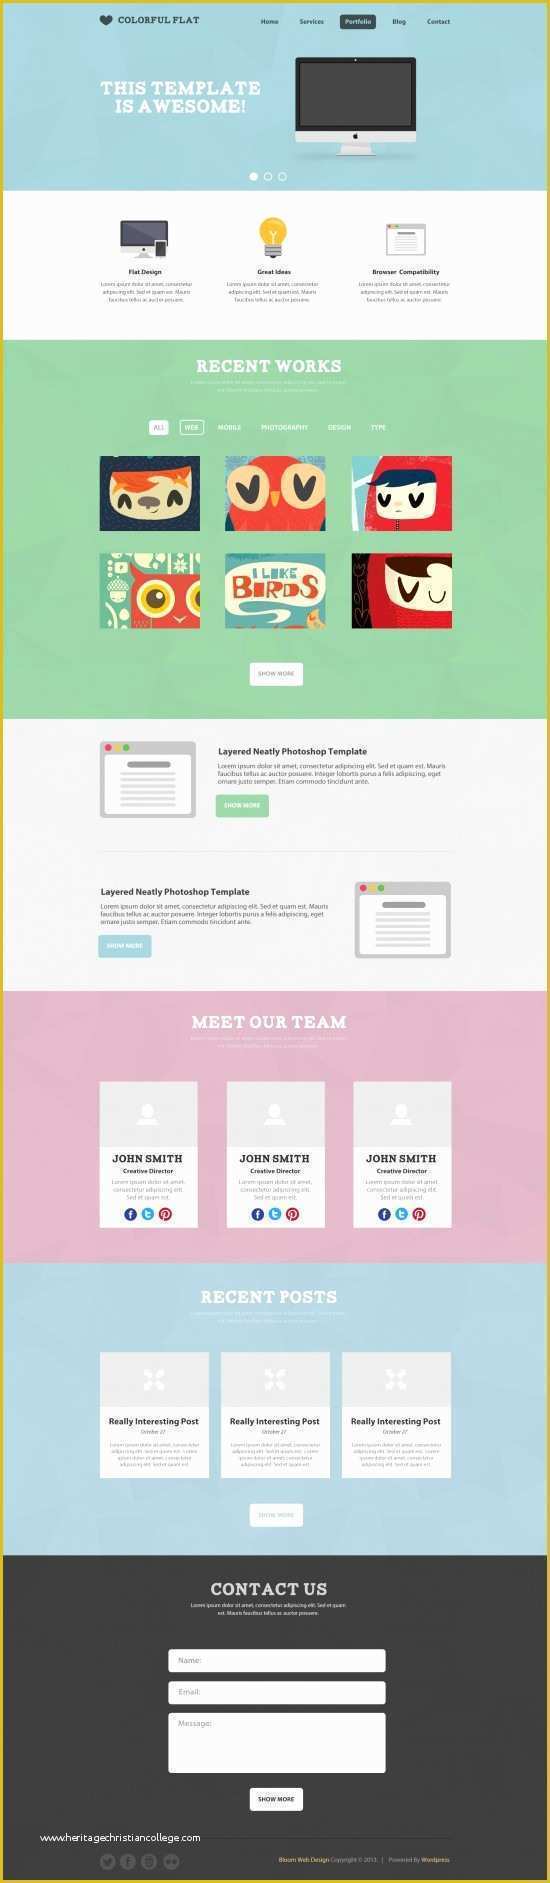 Free One Page Web Page Templates Of 40 High Quality Psd Website Templates Designbump